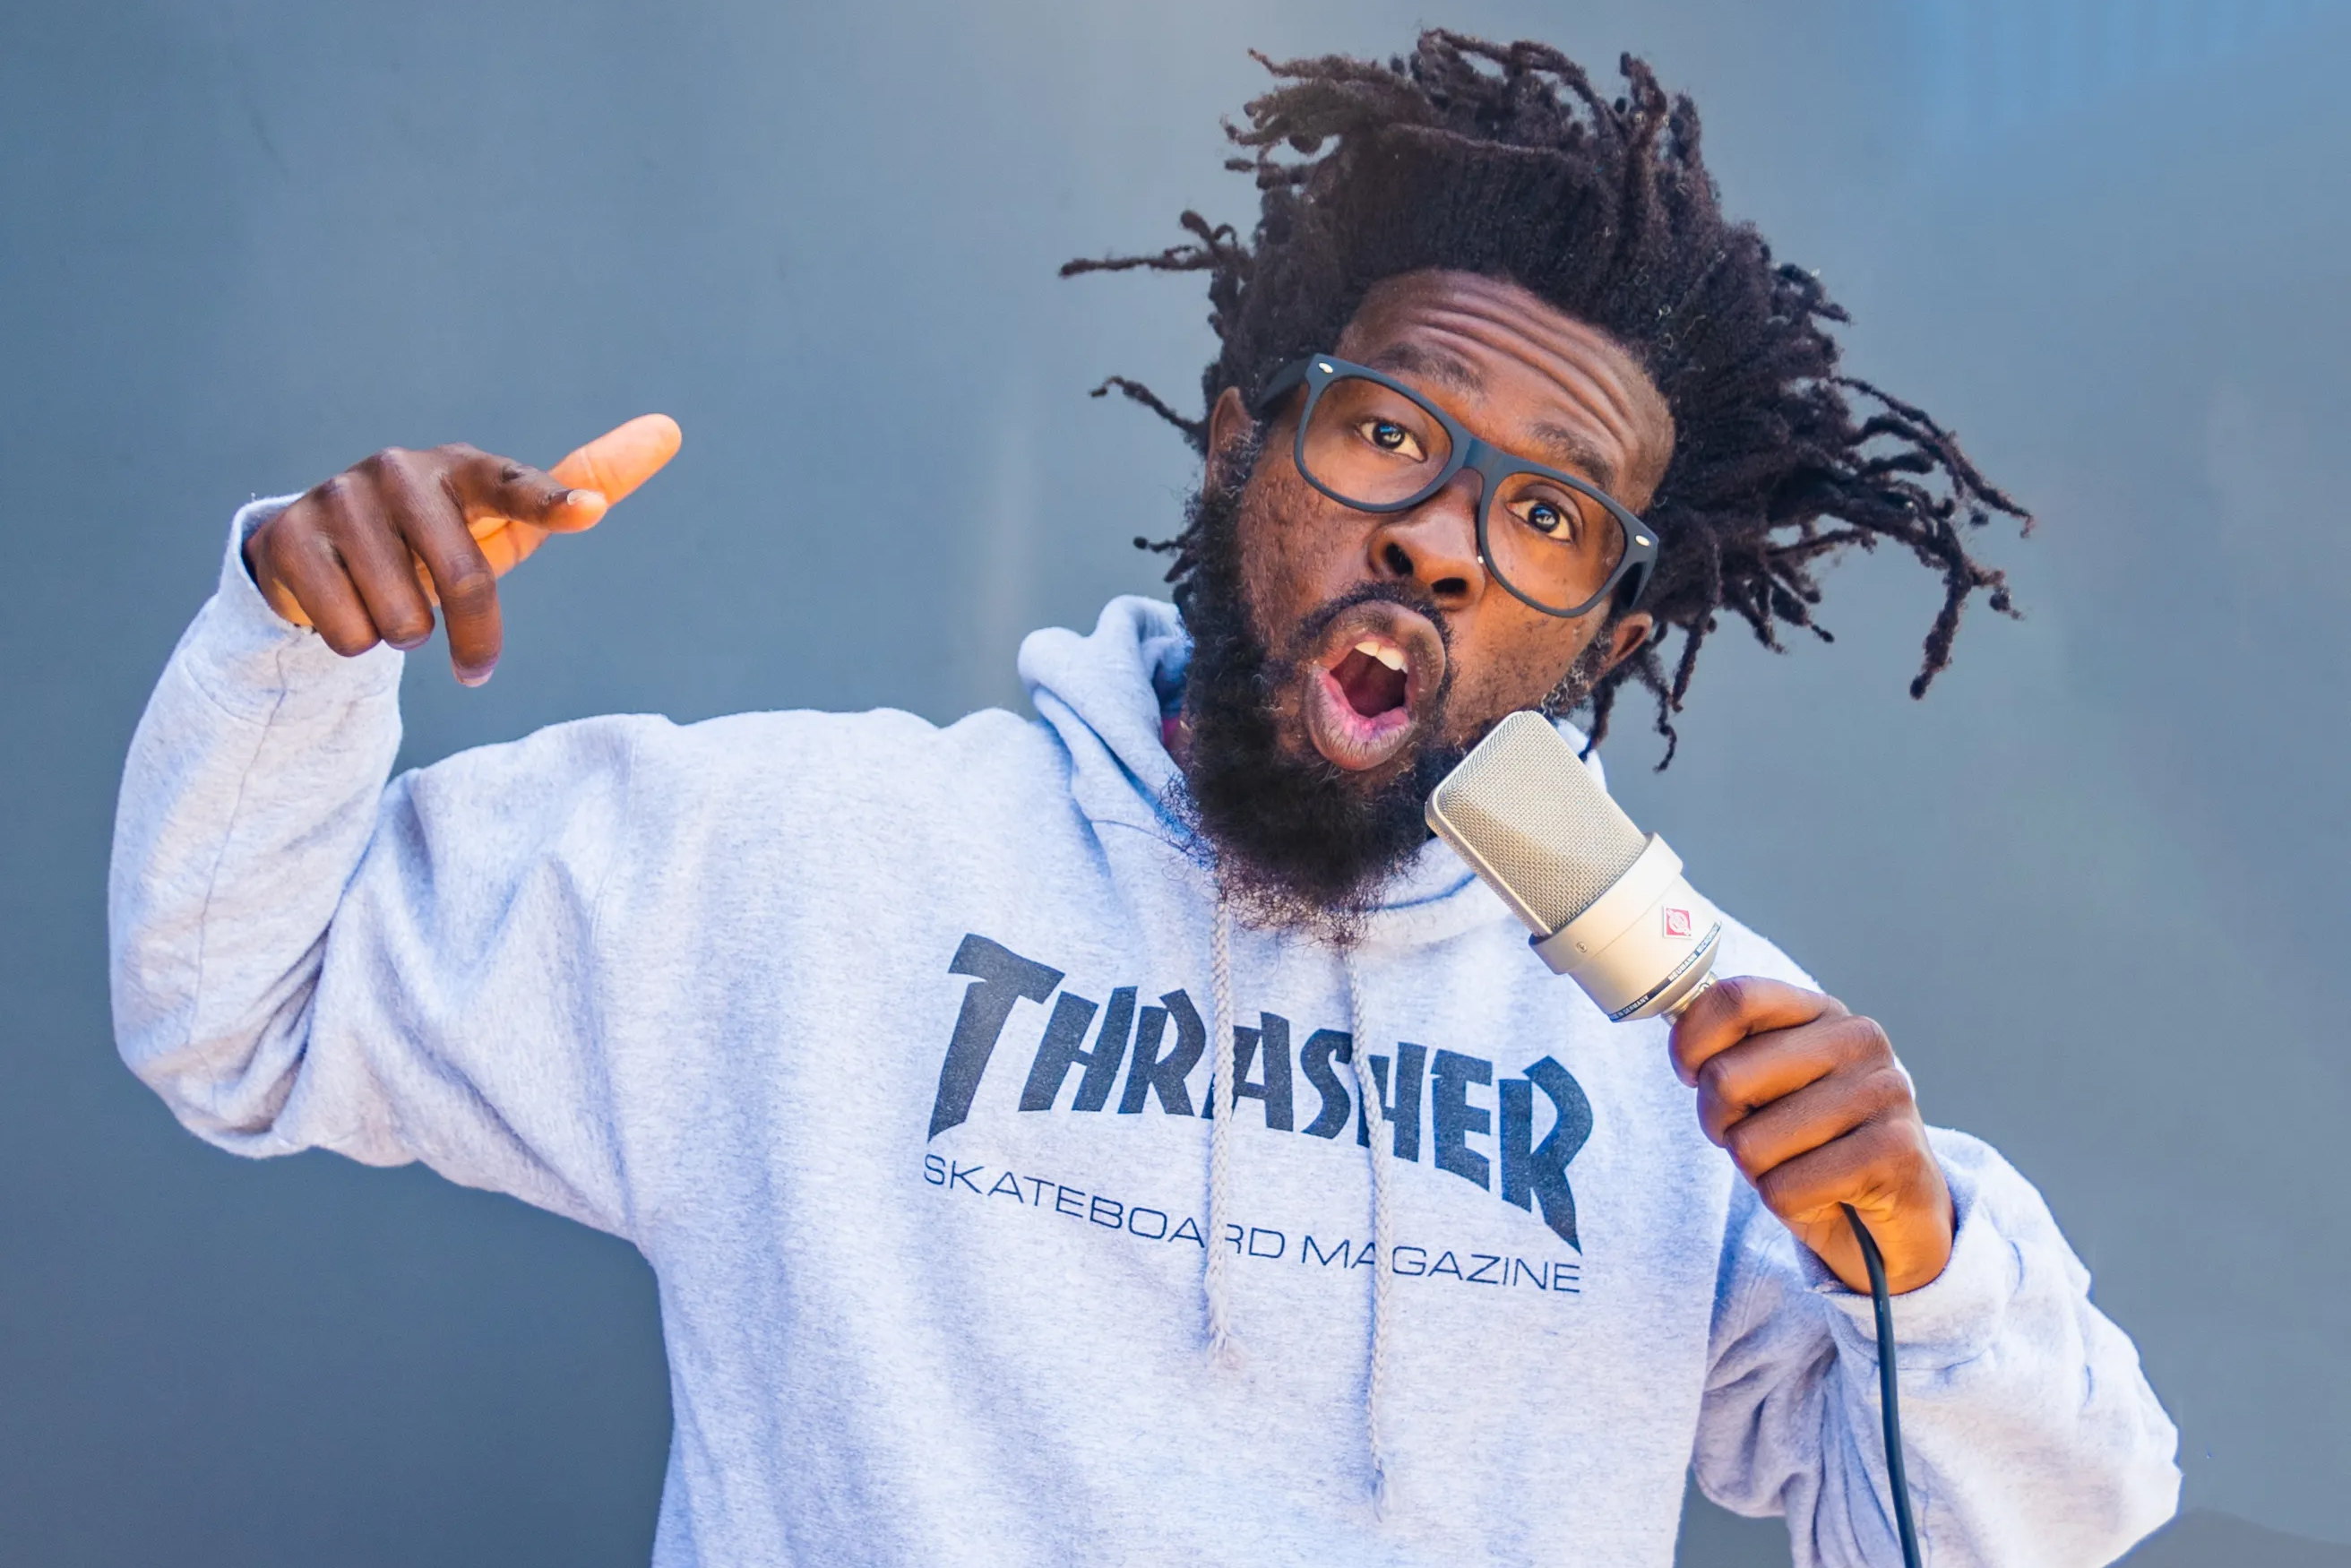 A man with dreadlocks, glasses, and a "Thrasher" hoodie holds a mic, pointing and singing with expression.